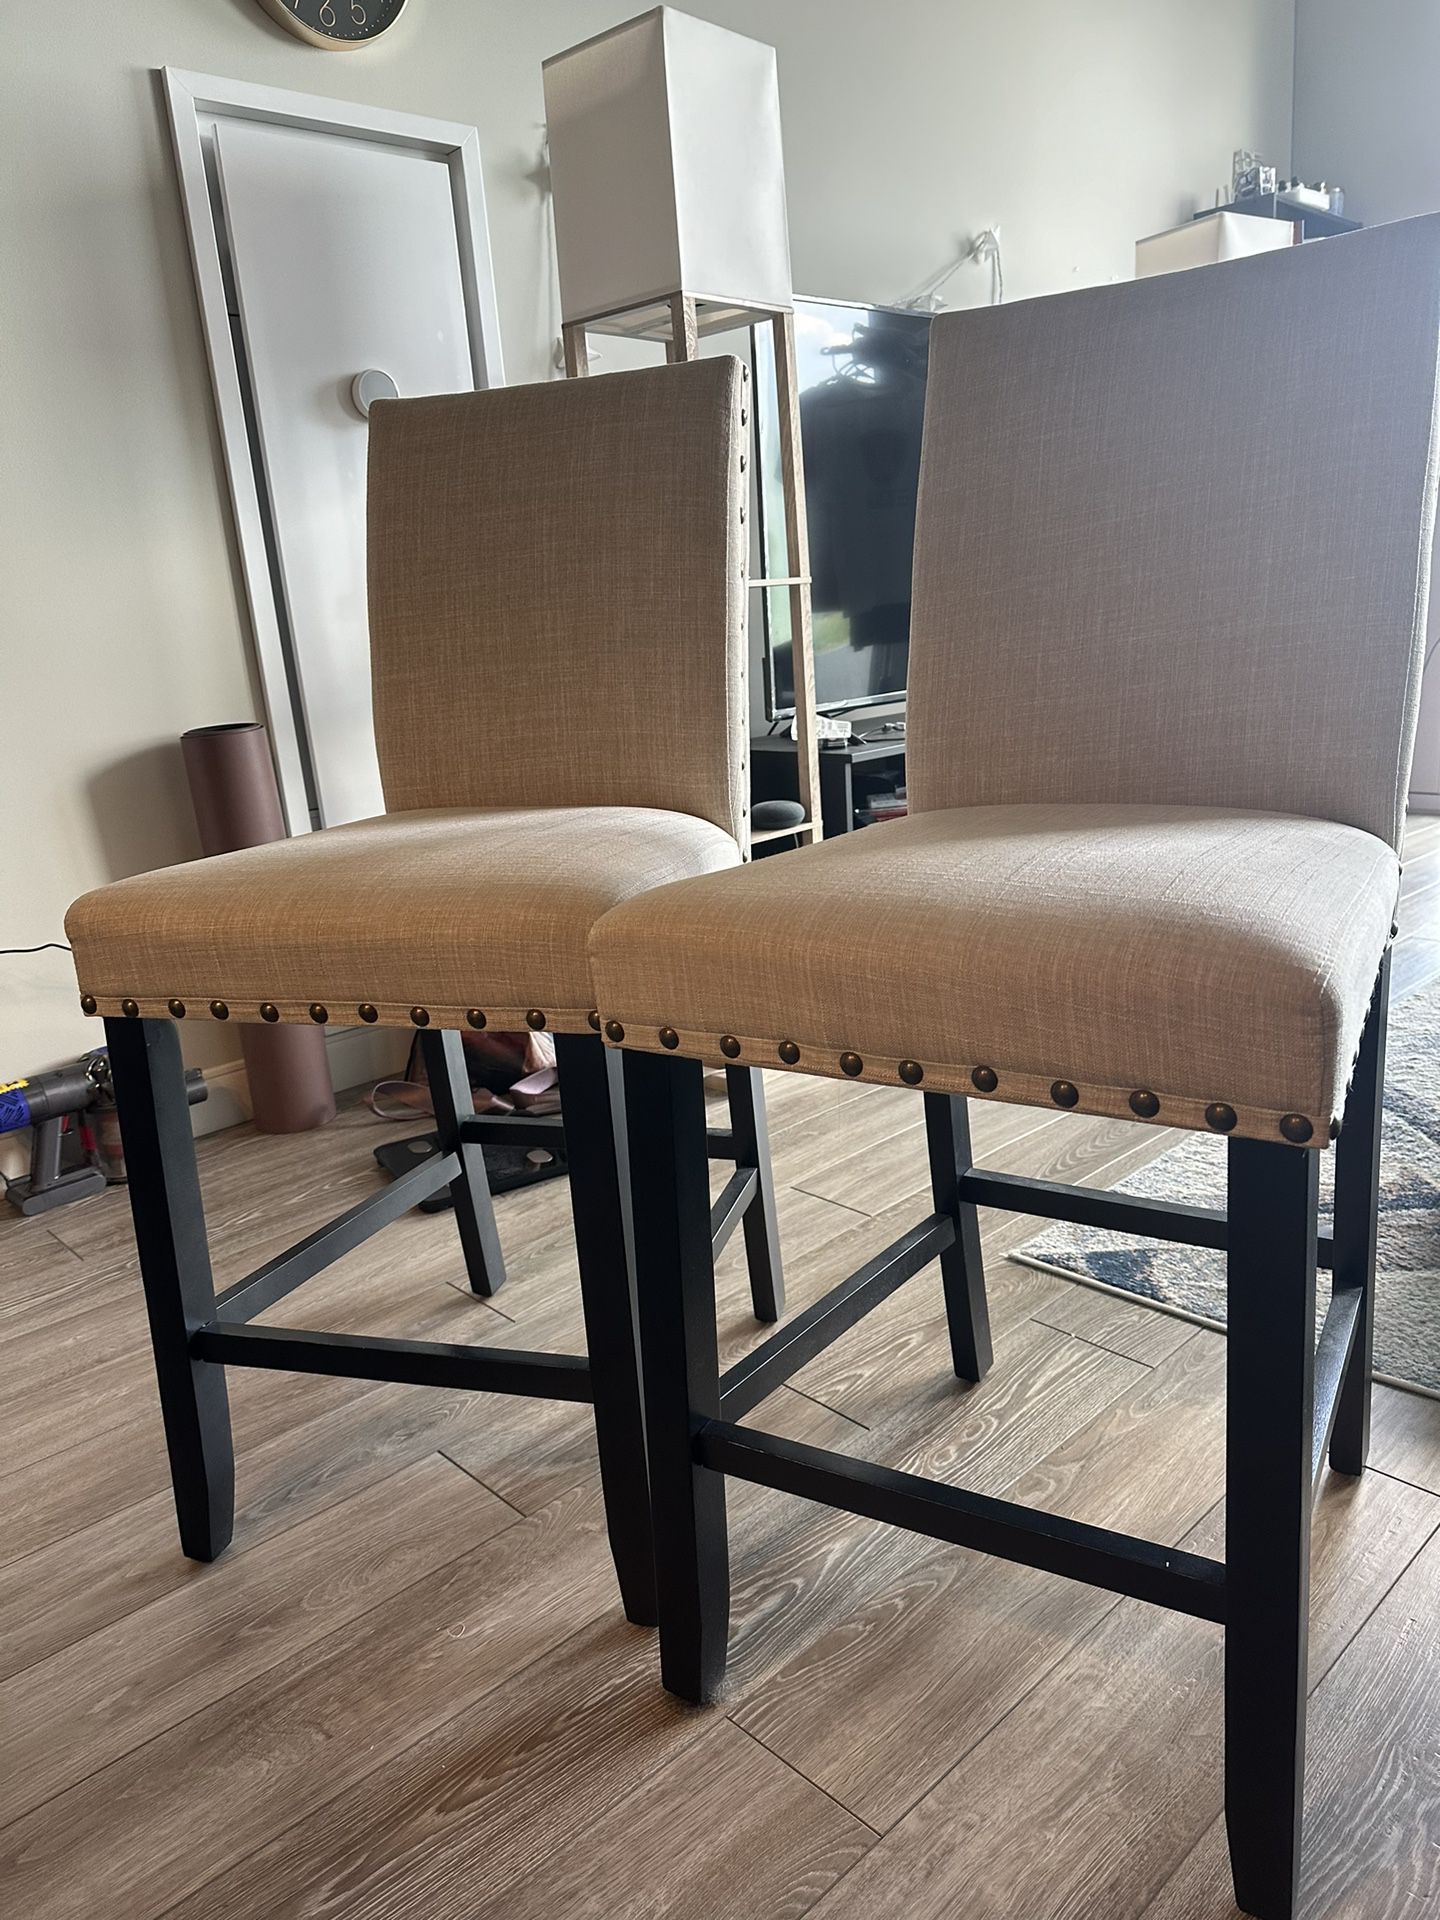 2 Beige Bar Stools With Back